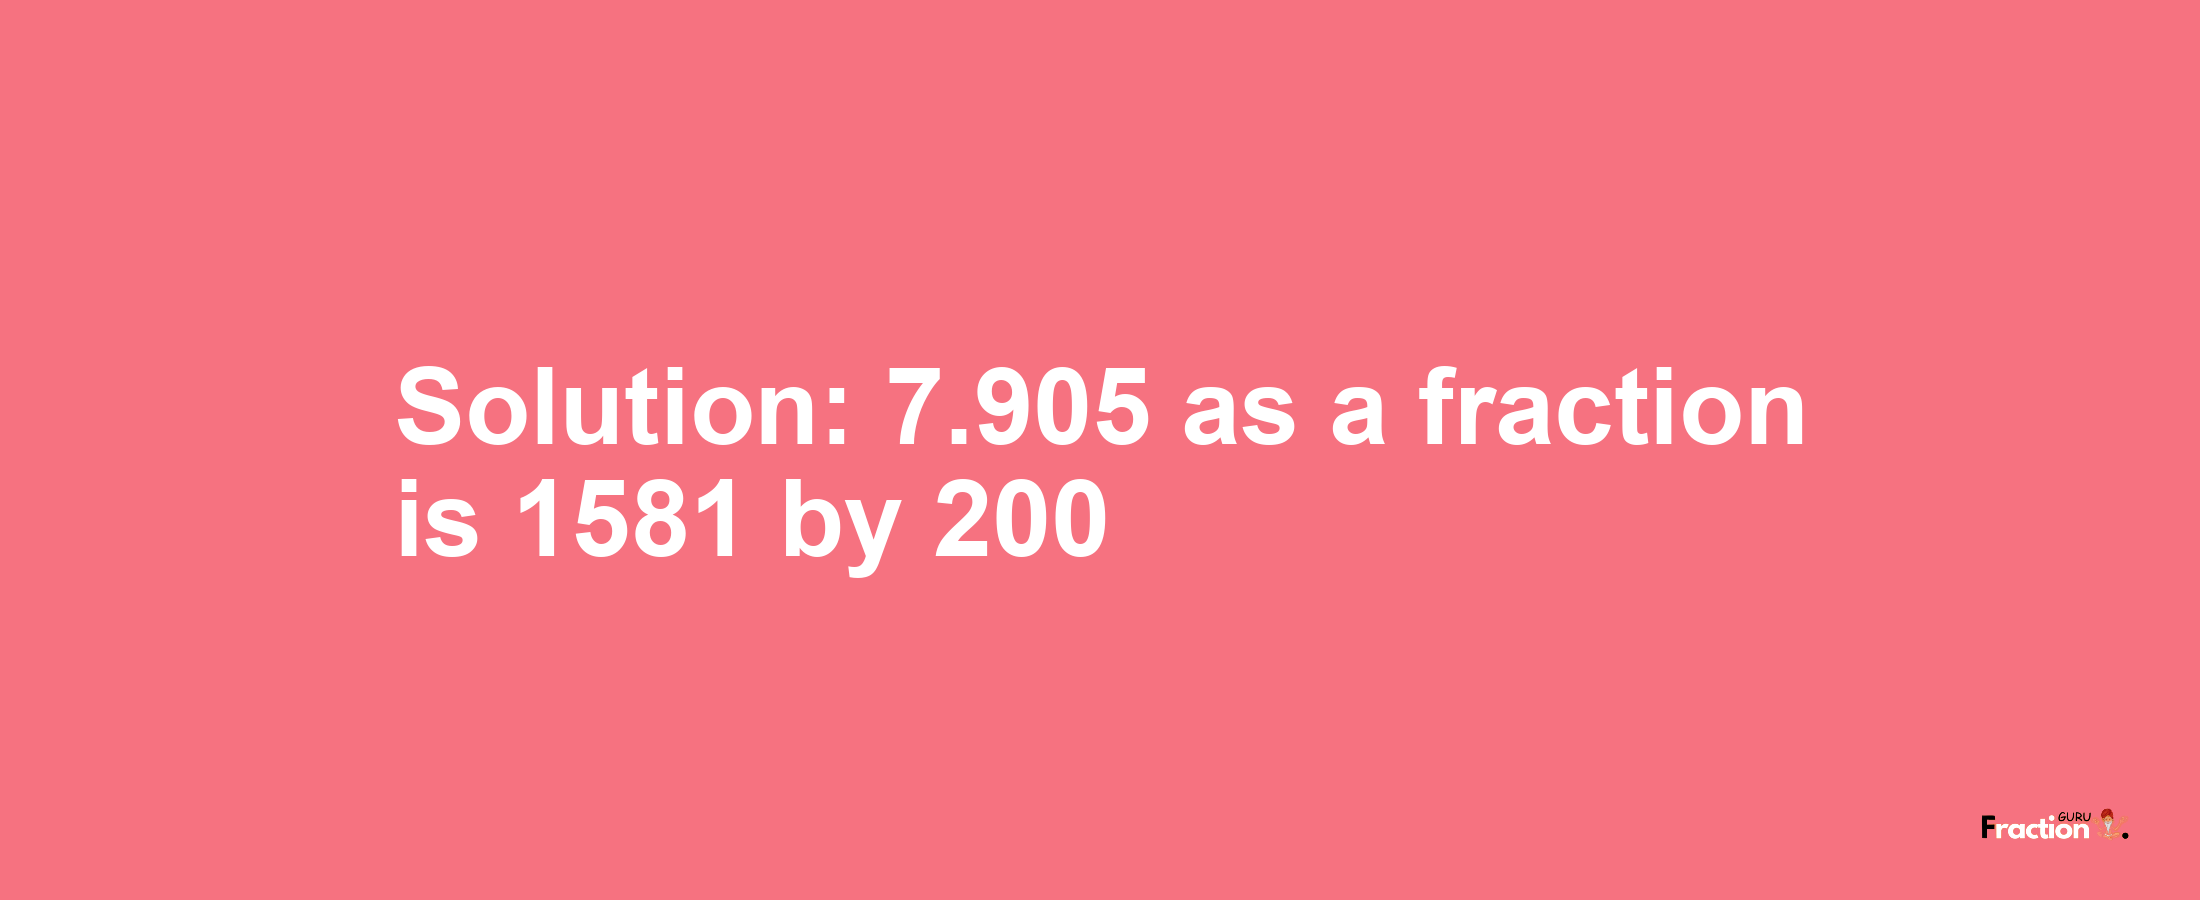 Solution:7.905 as a fraction is 1581/200